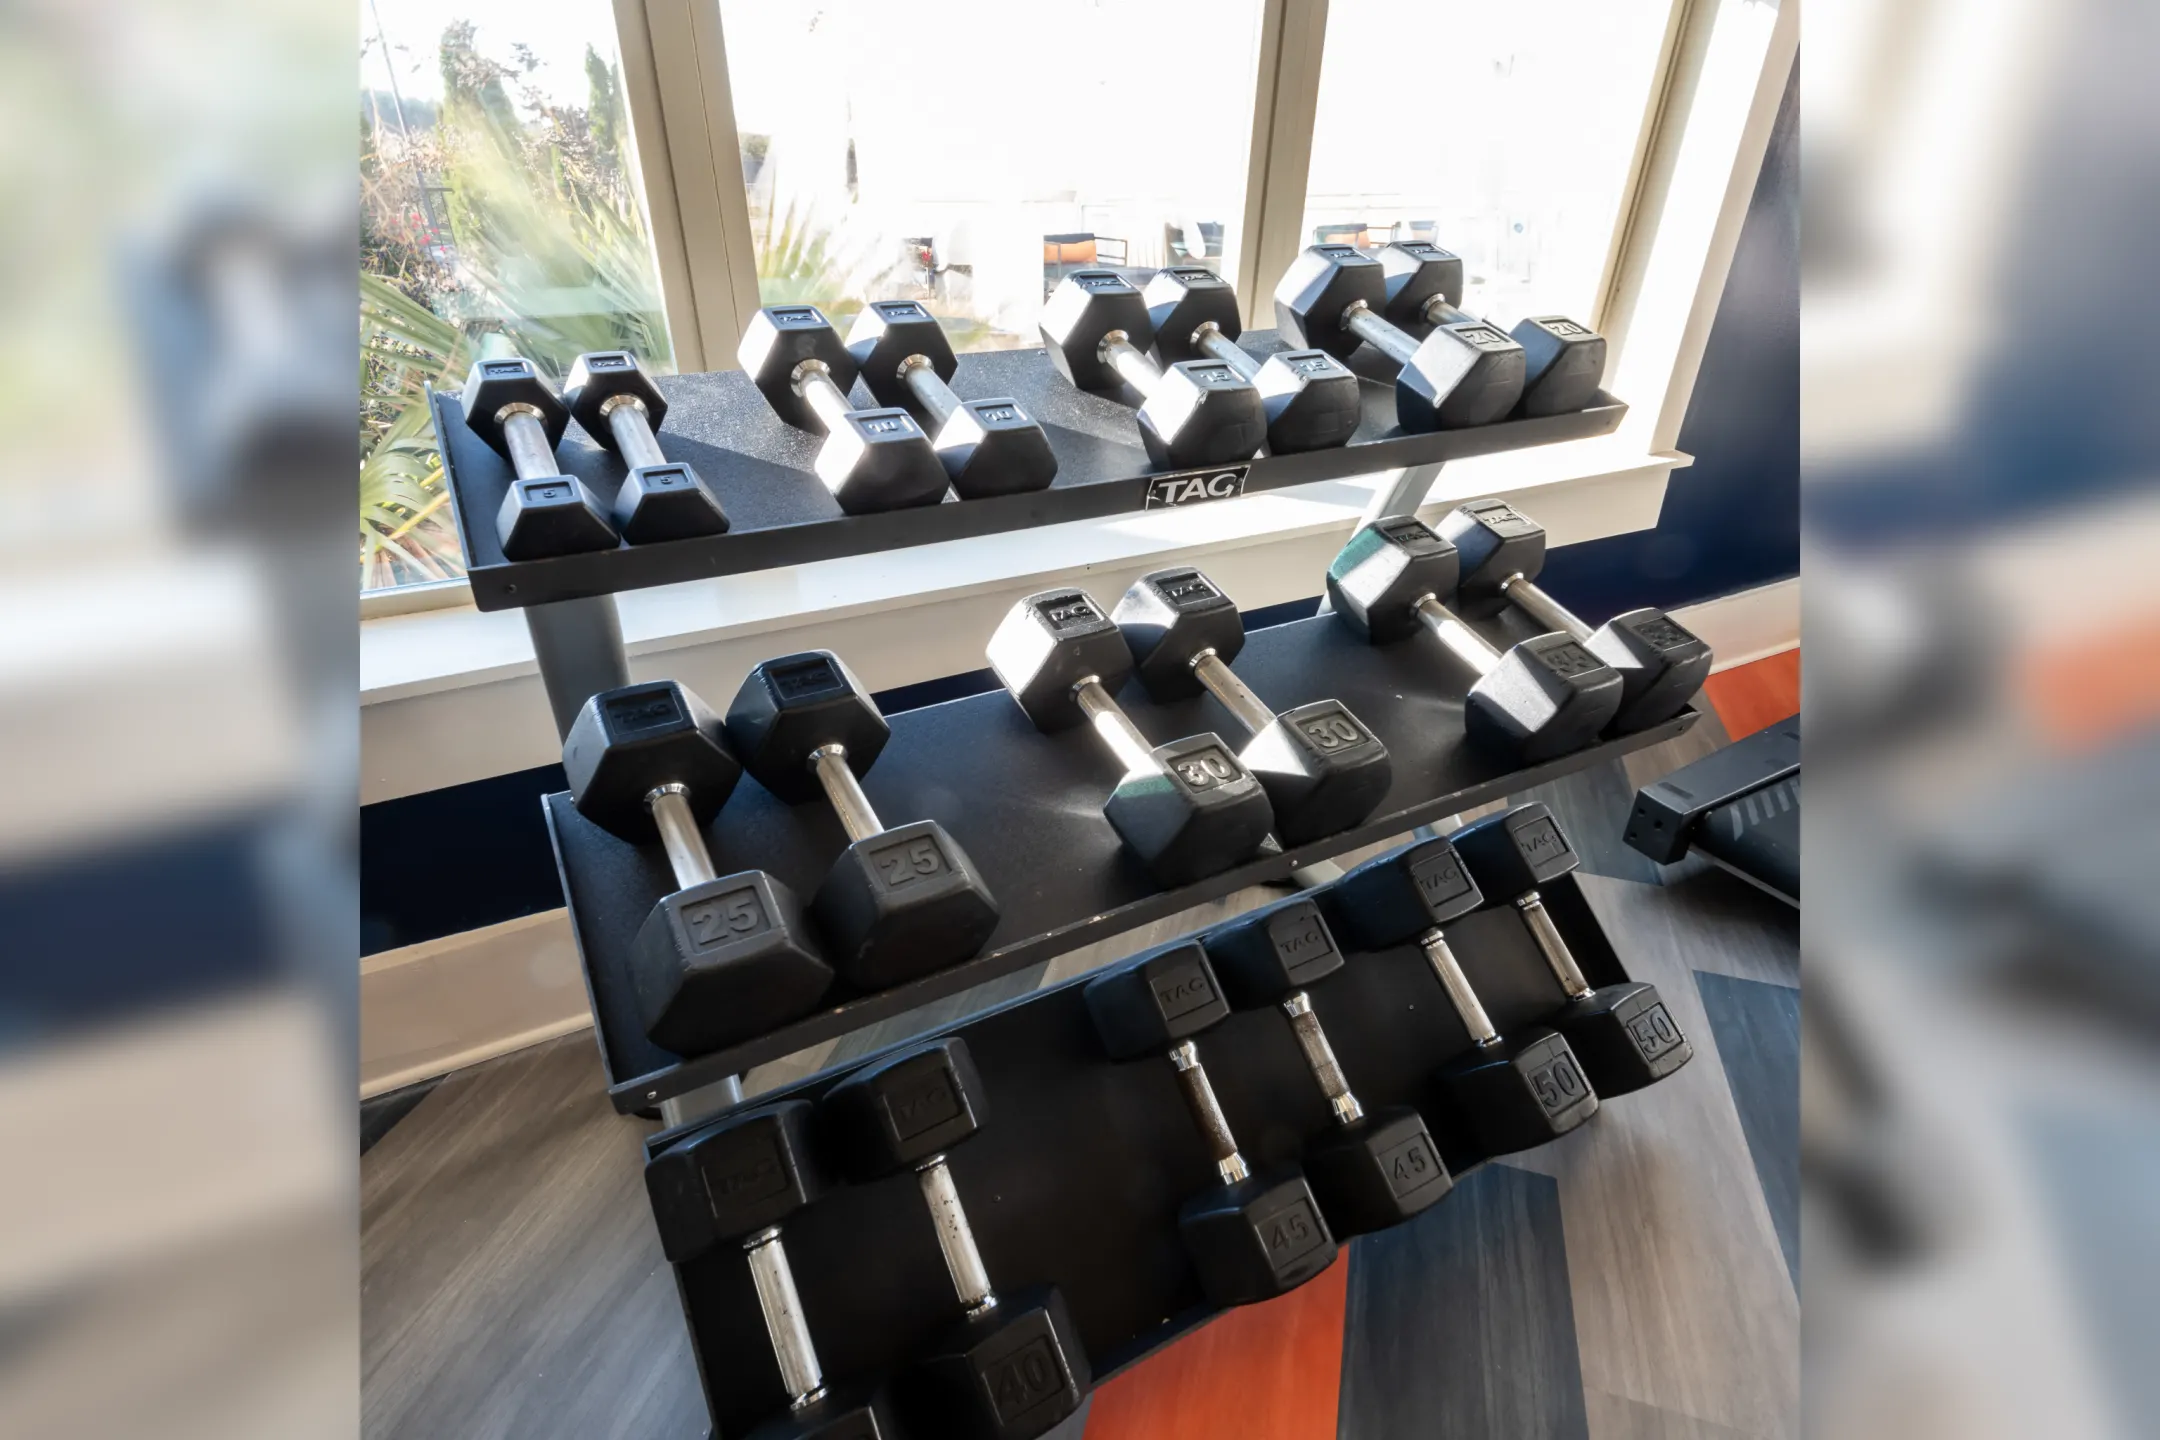 Fitness Weight Room - The Crest At Brier Creek Apartments - Raleigh, NC